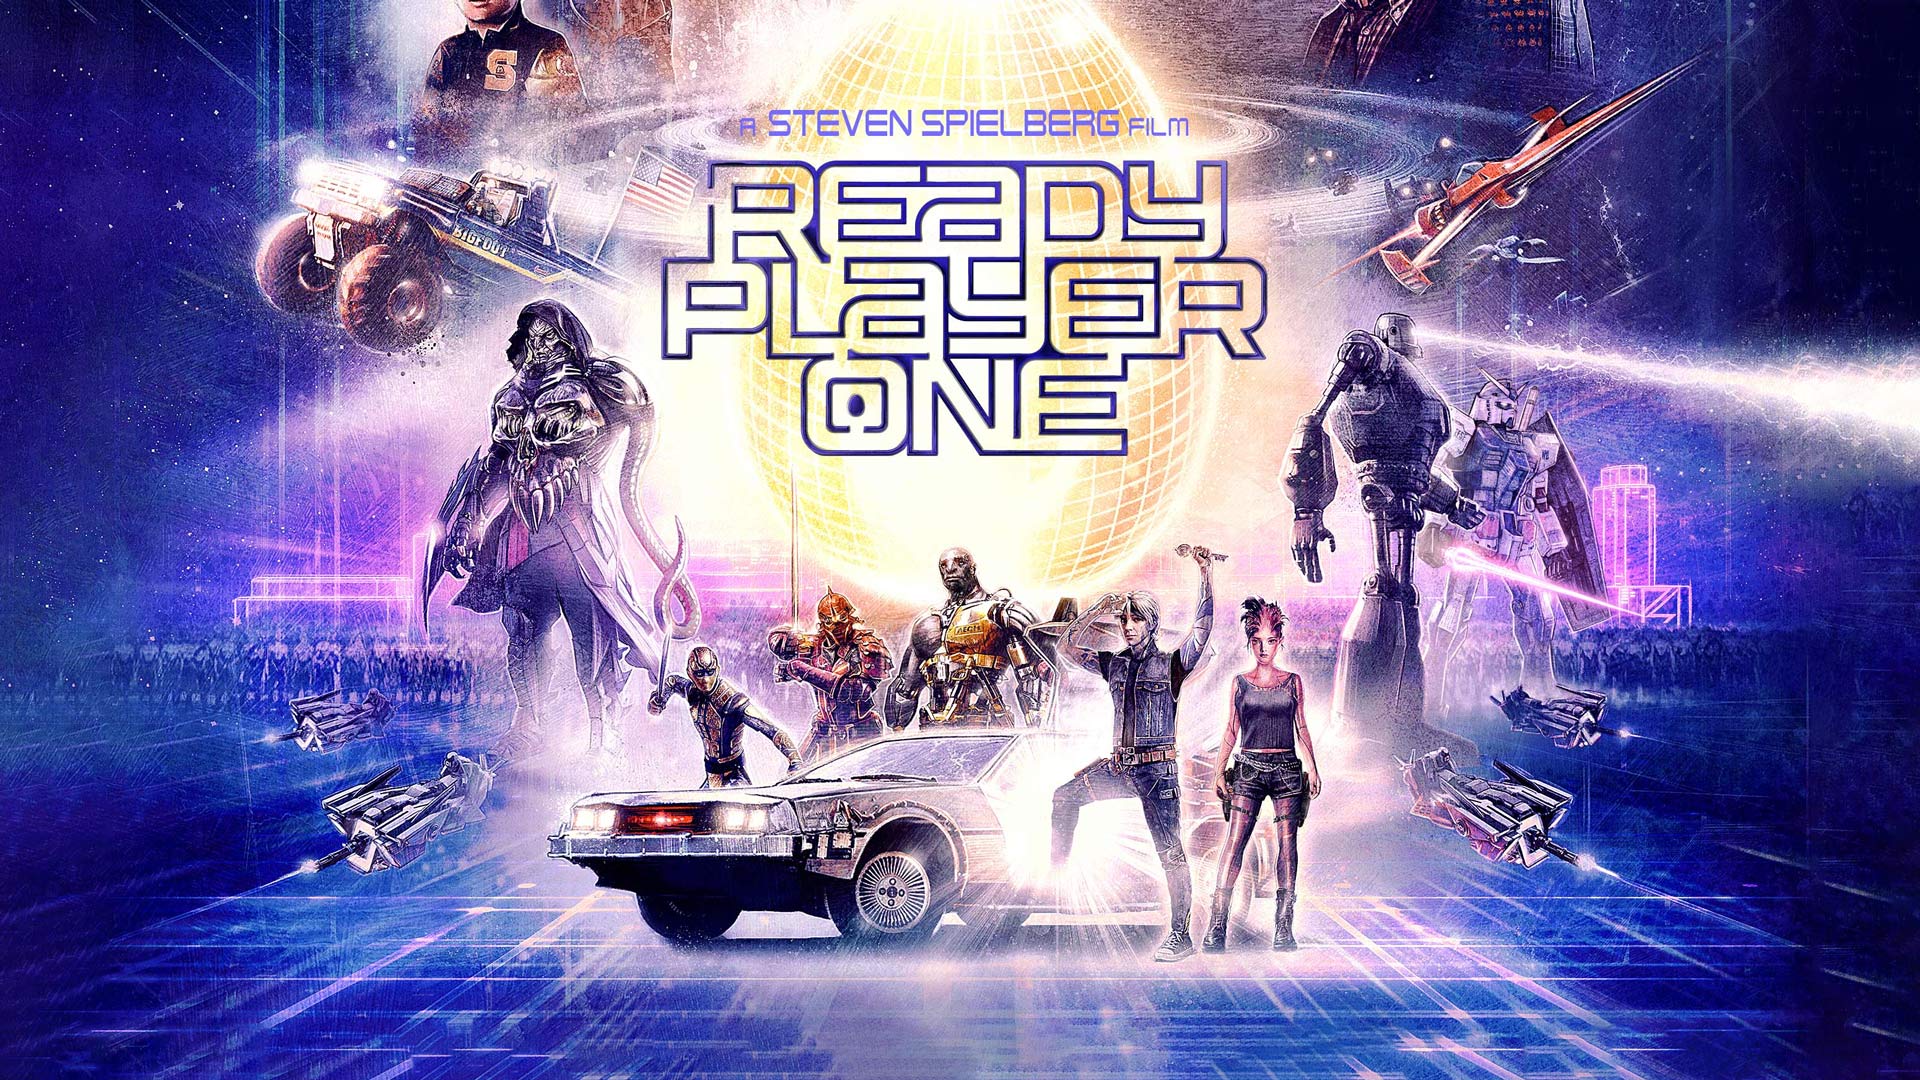 A Professorial Review Of Steven Spielberg S Ready Player One This Professor Plays